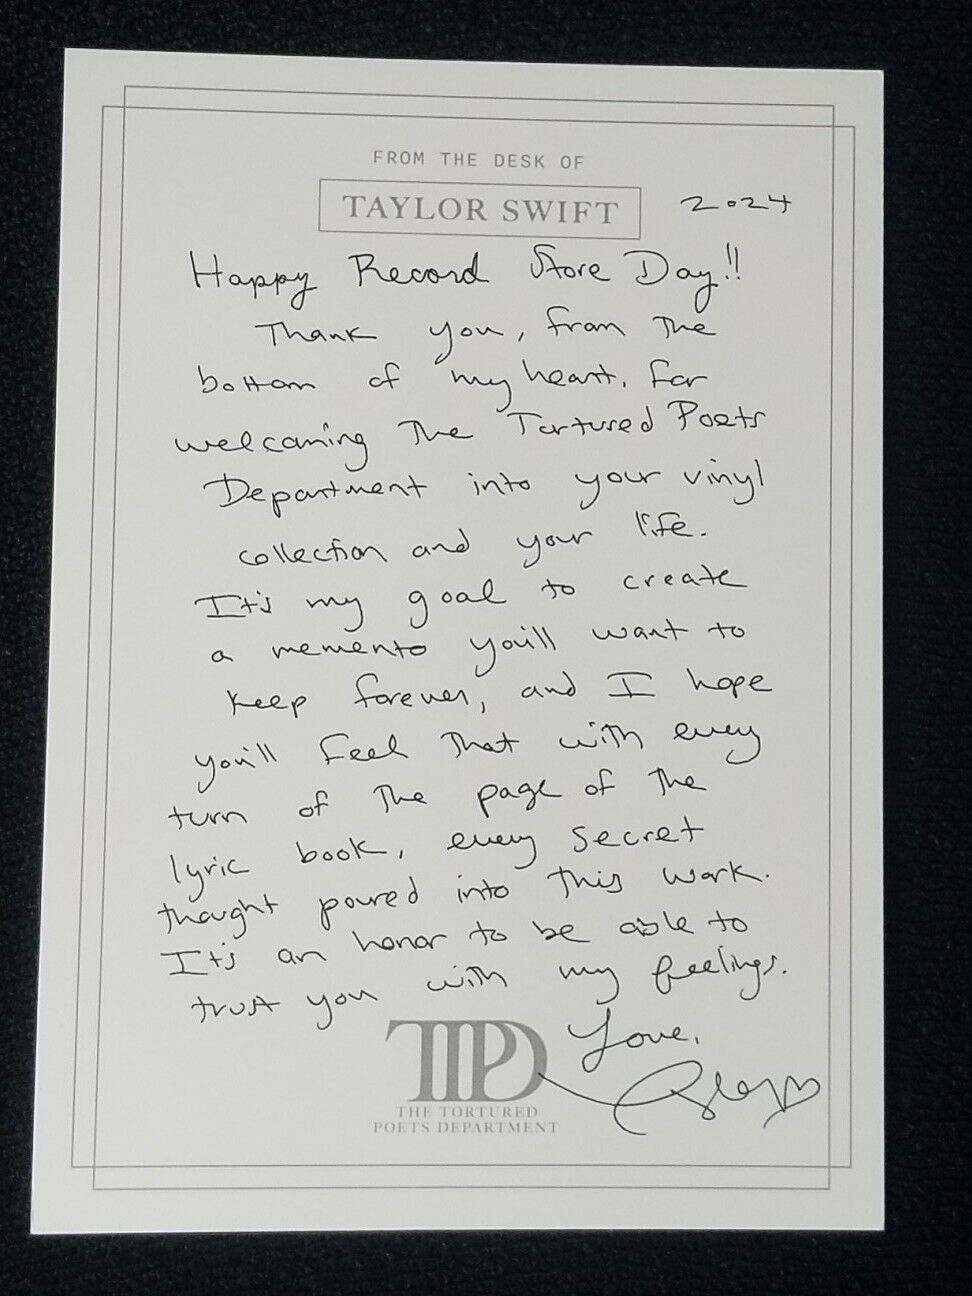 Taylor Swift RSD 2024 Letter New Record Store Day Tortured Poets Department Card